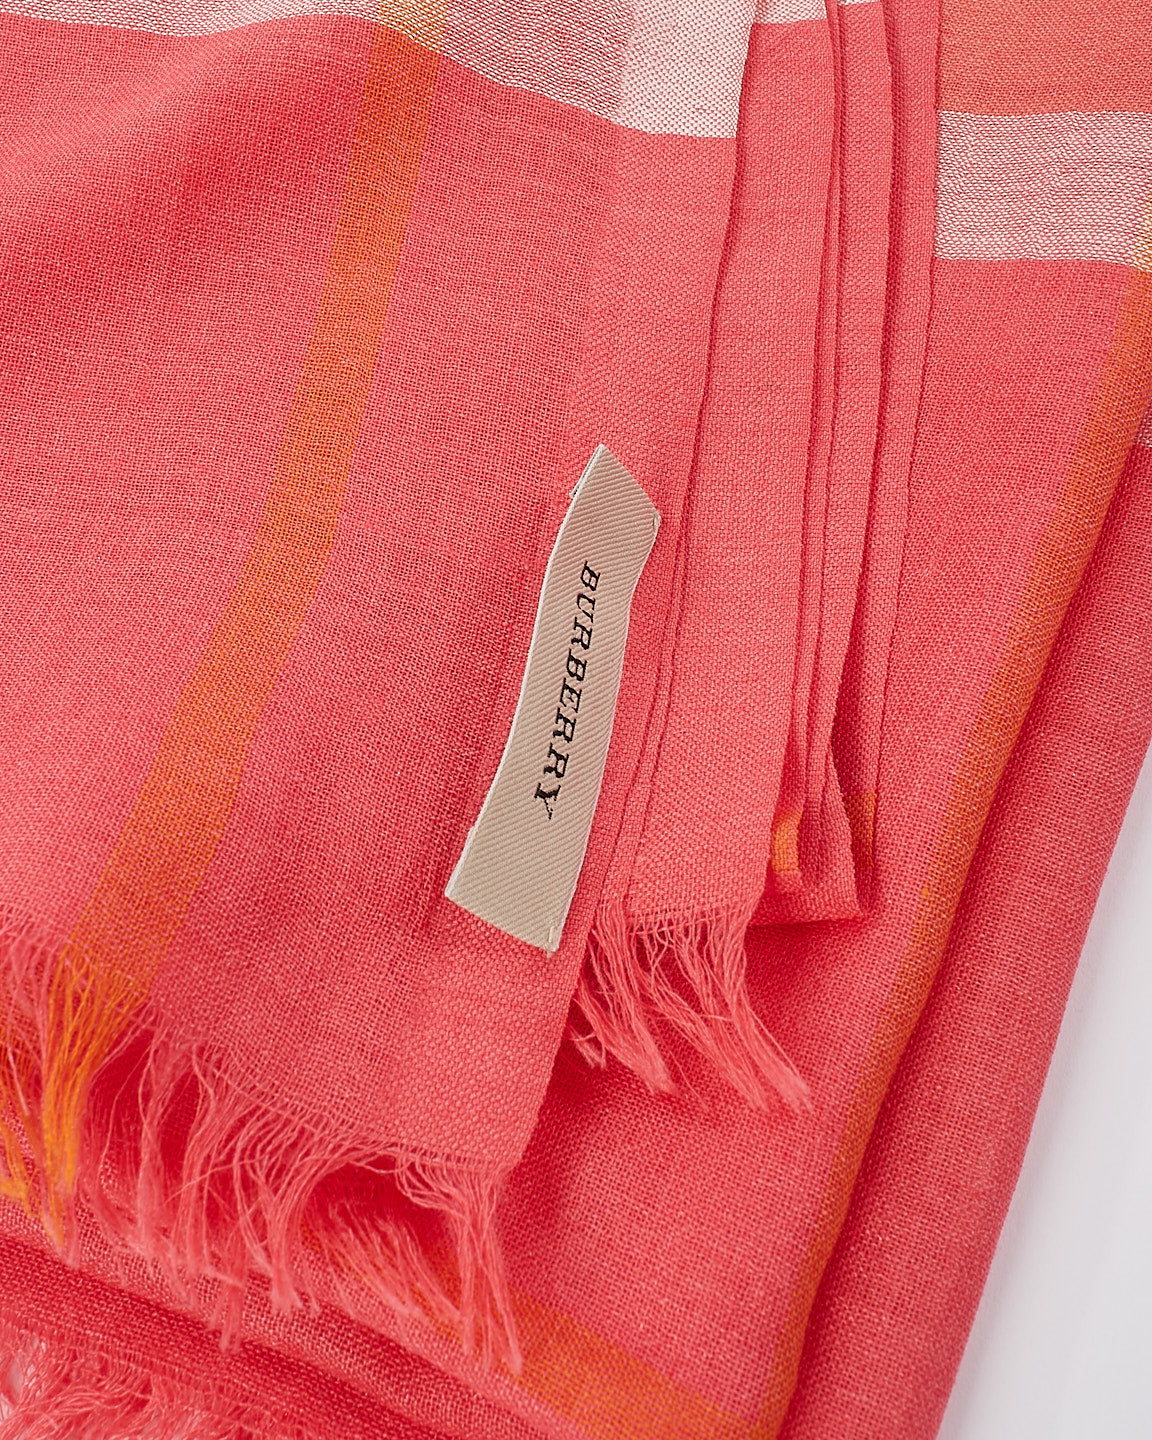 Burberry Pink Check Lightweight Fabric Scarf